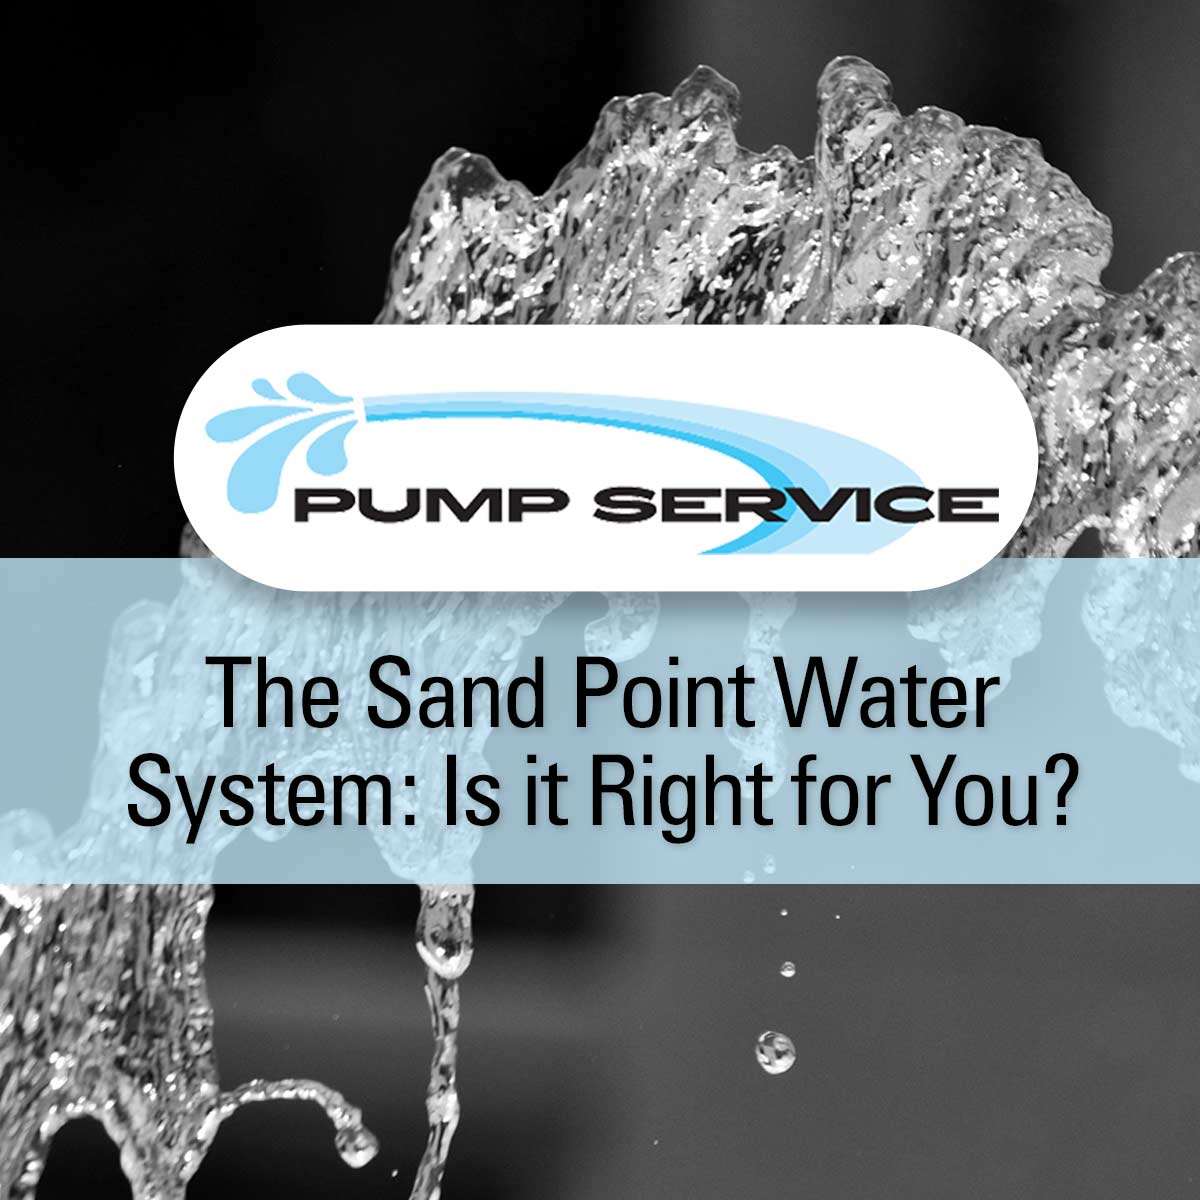 The Sand Point Water System: Is it Right for You?